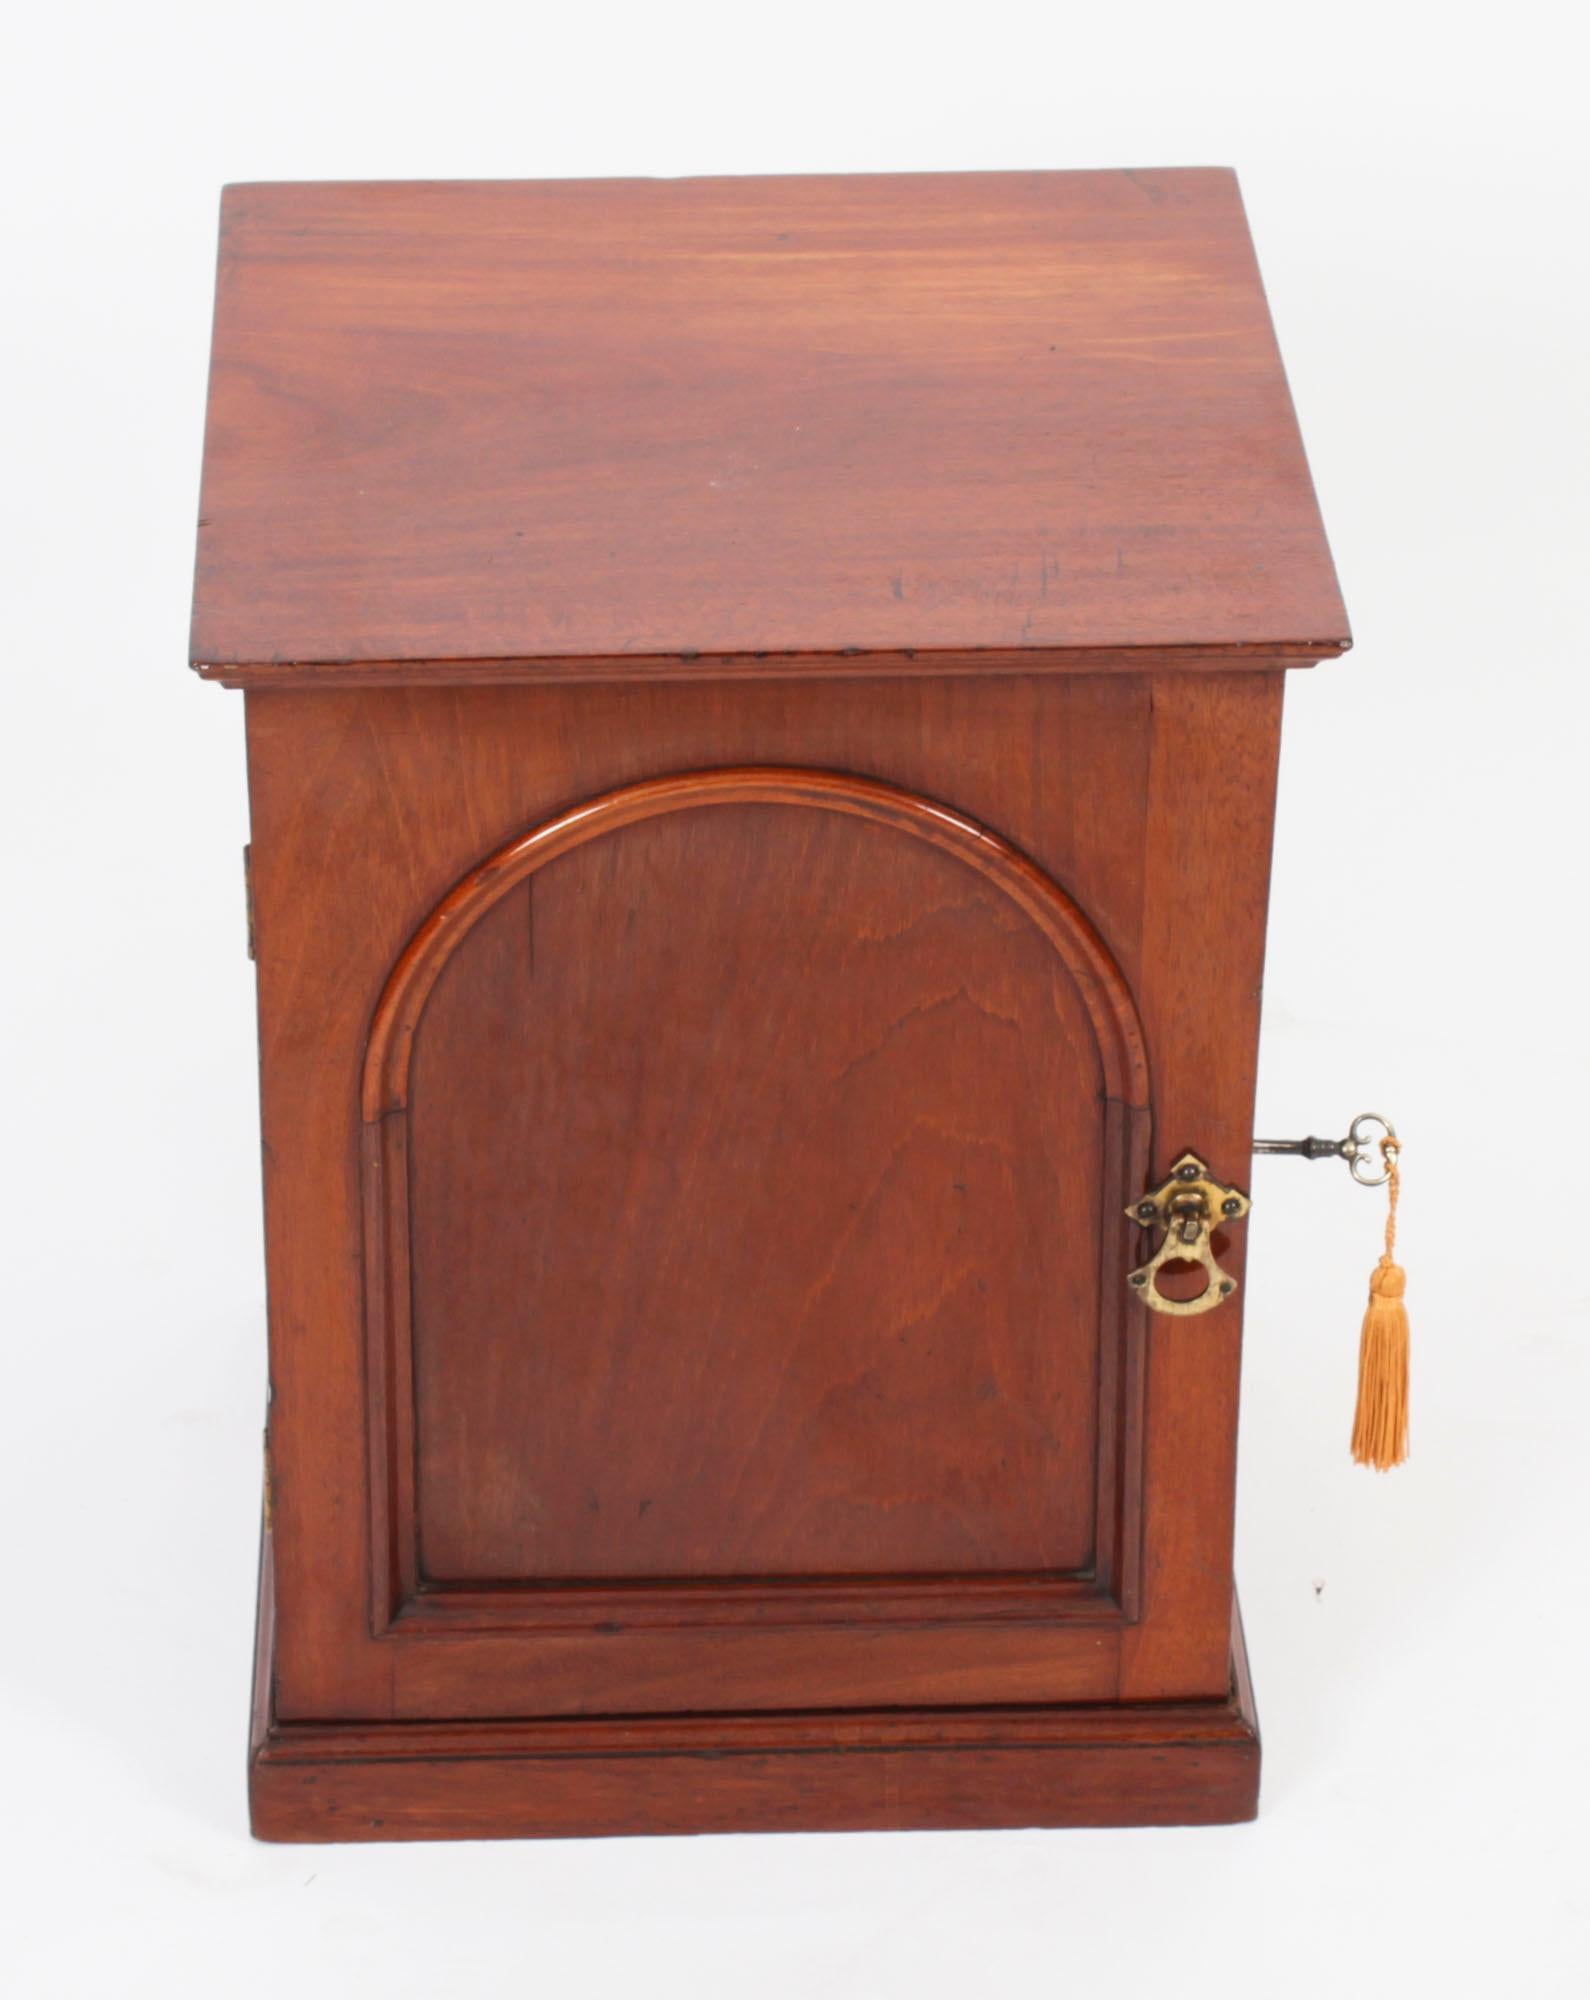 This is a elegant Victorian mahogany table top jewellery collectors cabinet, circa 1840 in date.
 
The cabinet is freestanding, finished all round, and features a paneled door, enclosing three drawers on a plinth base. The top drawer feature a